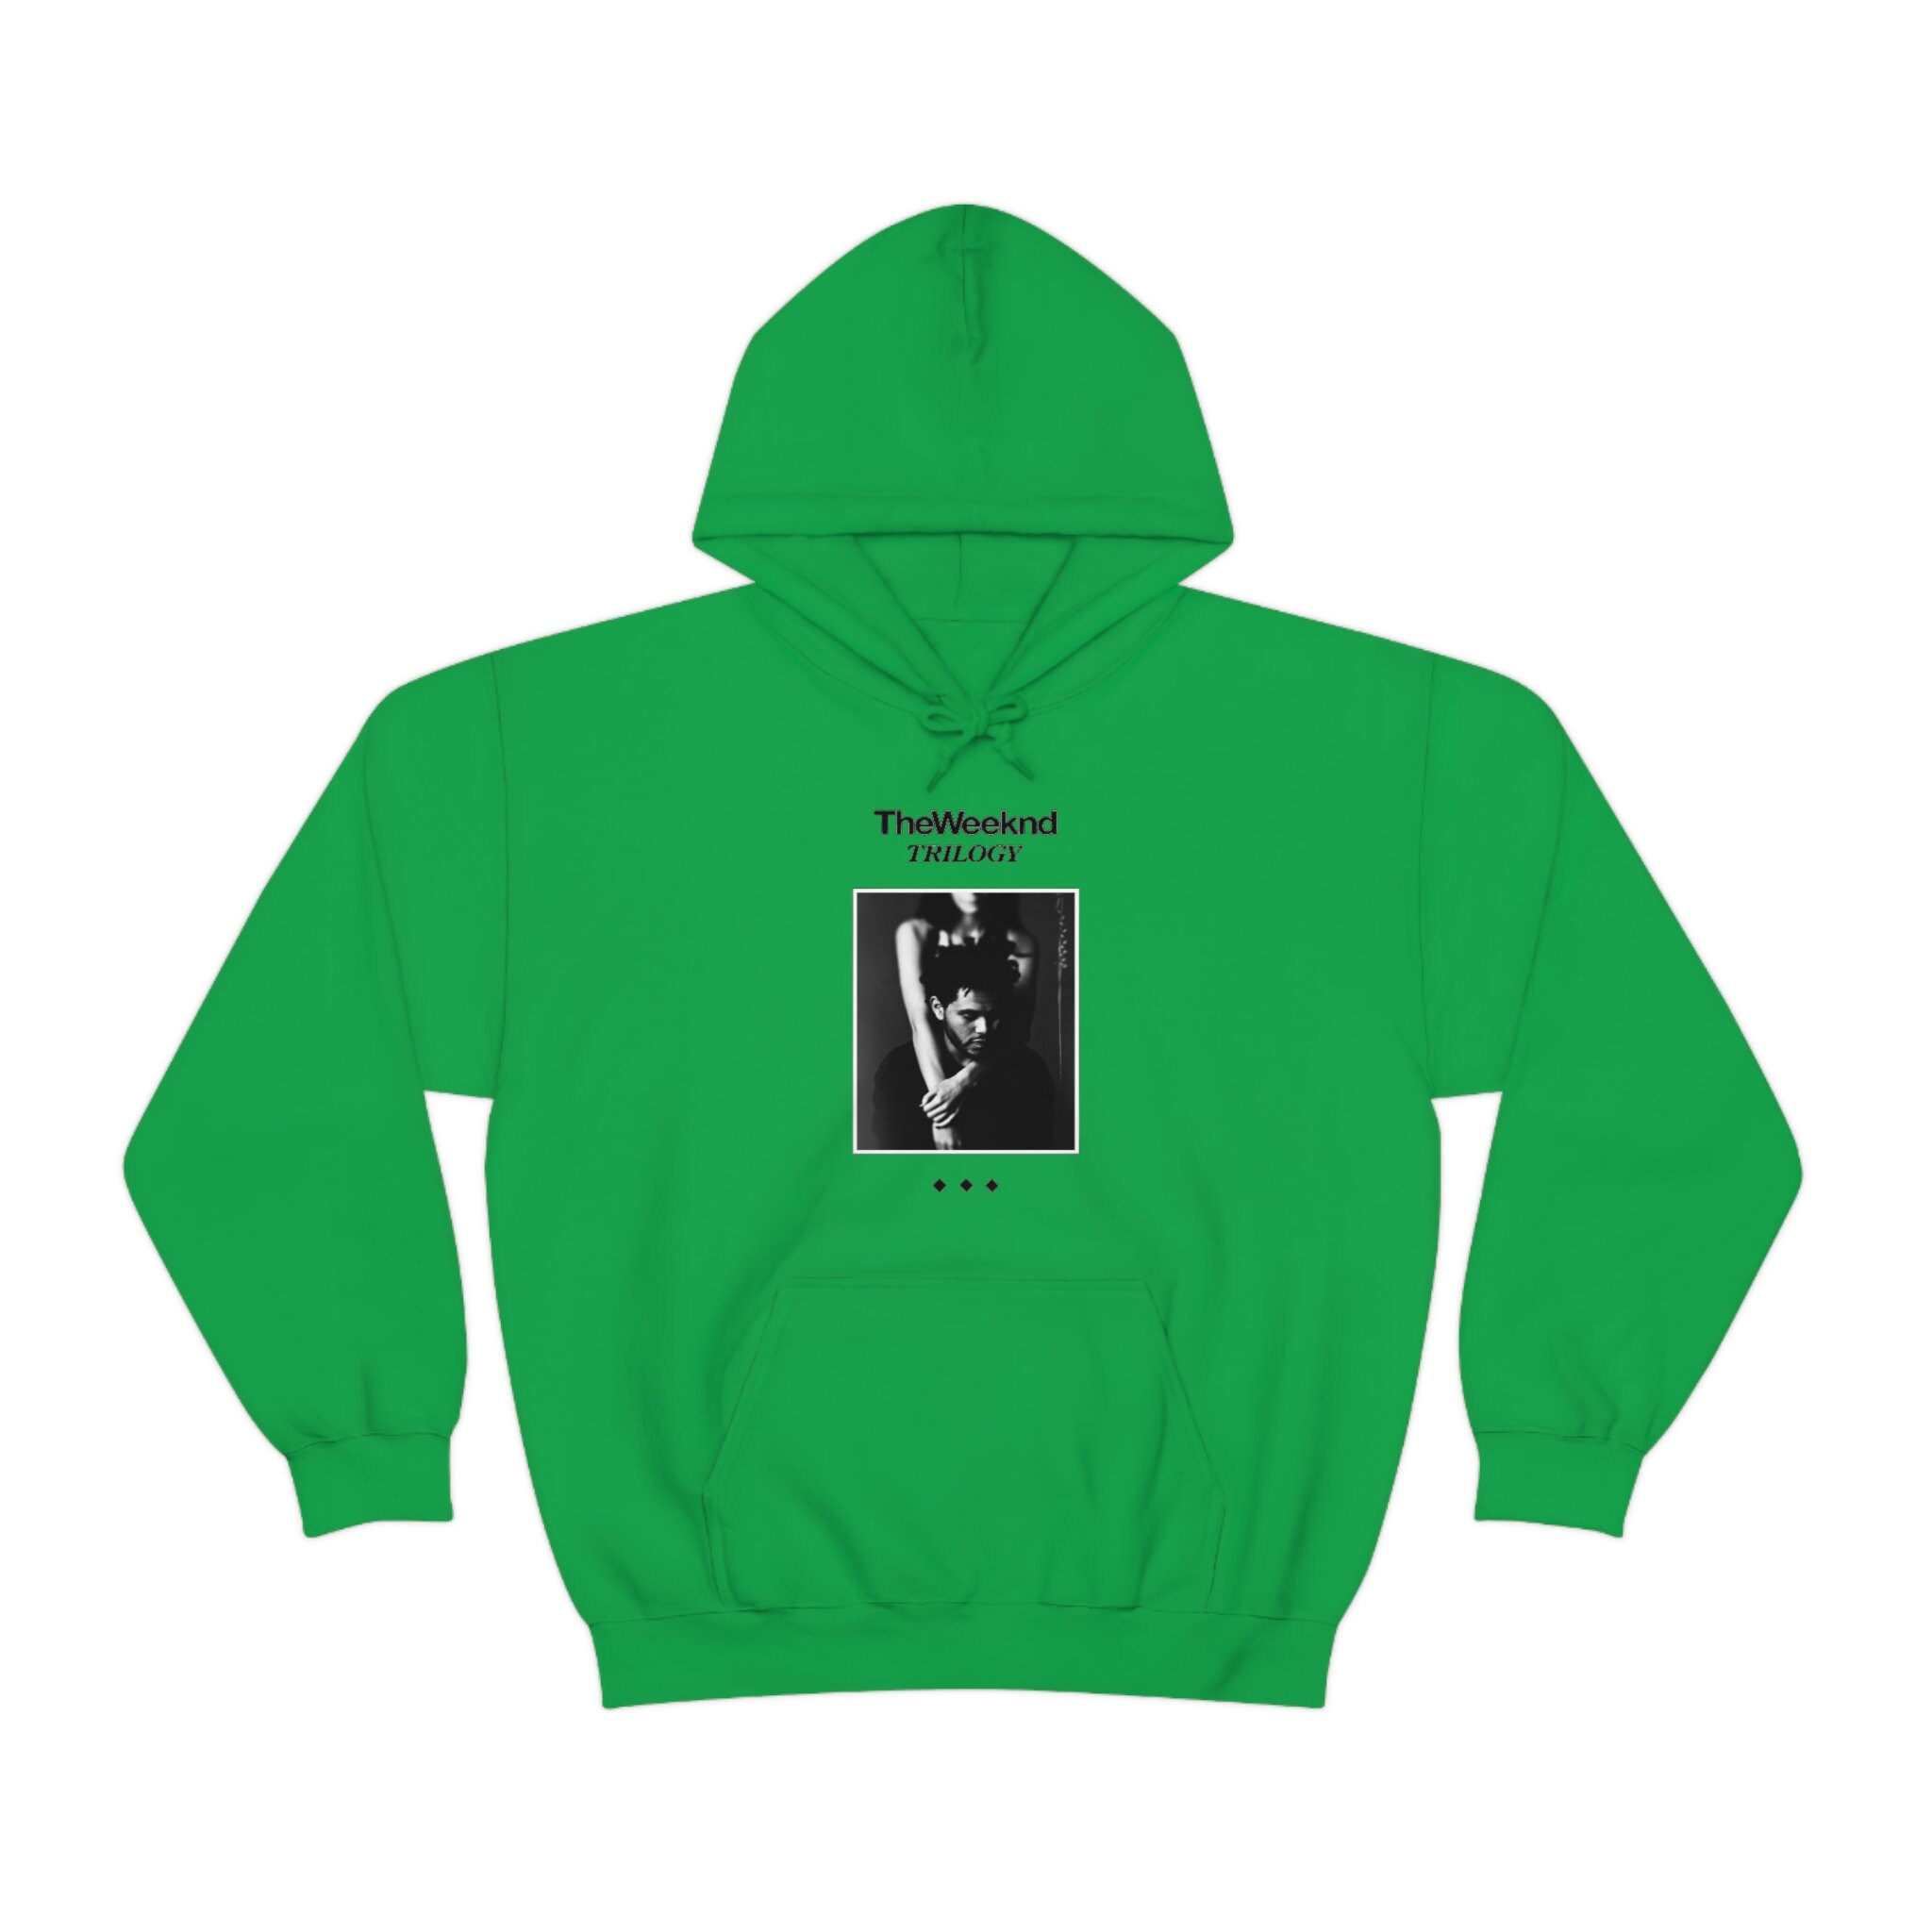 Discover The Weeknd - Trilogy / Unisex Premium Hoodies